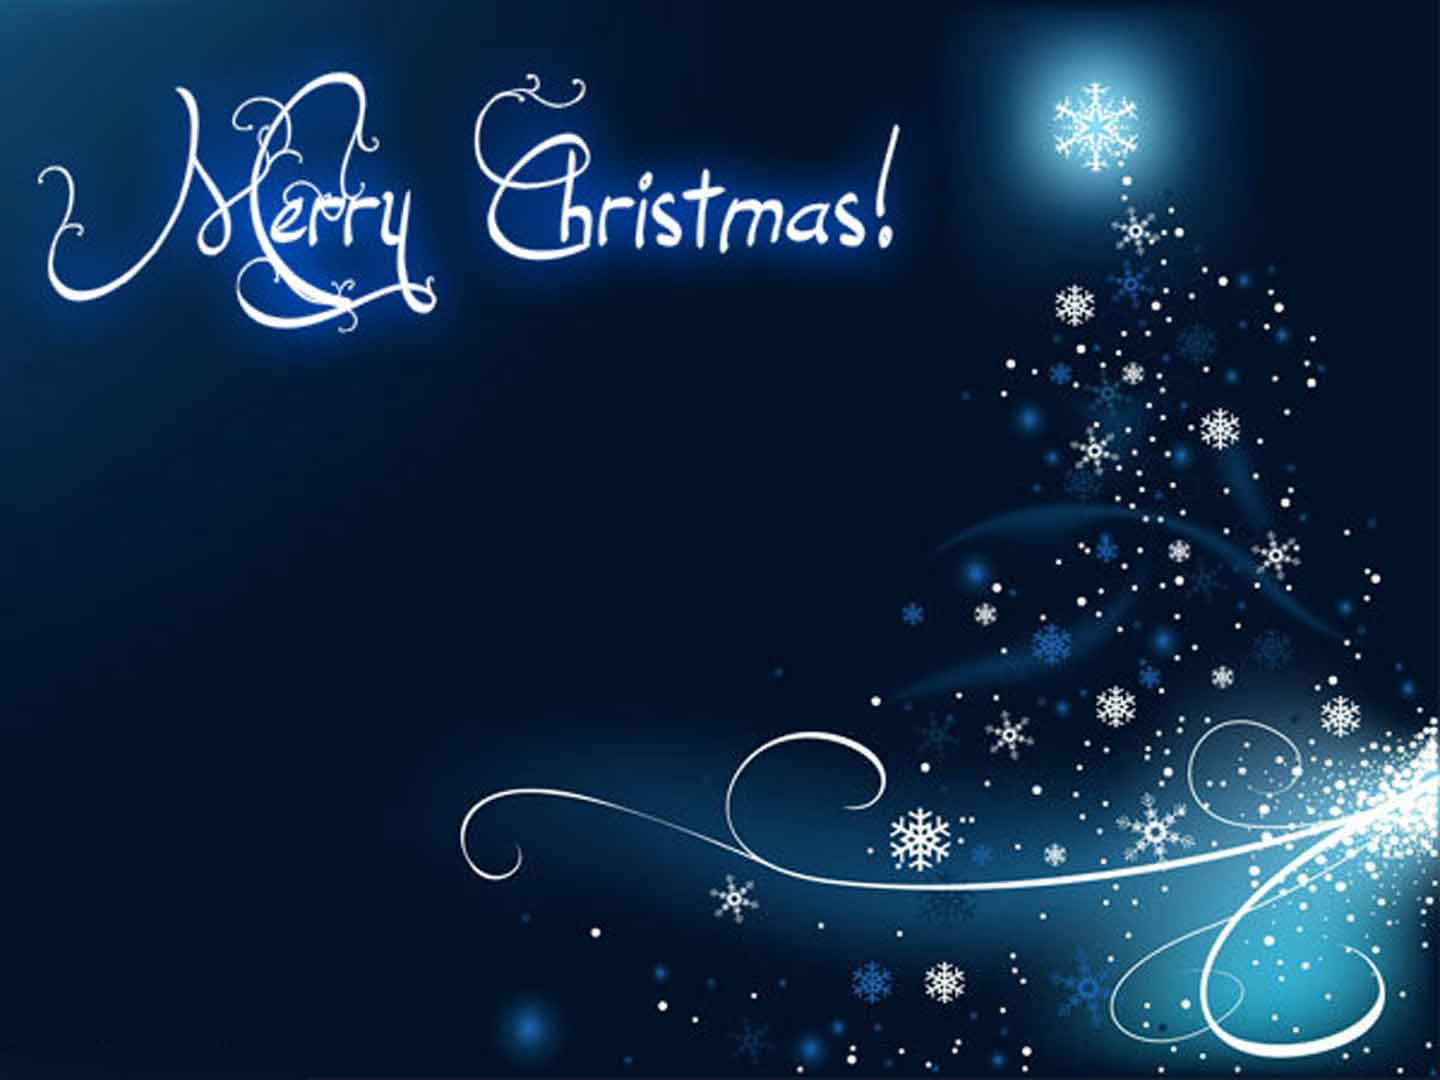 Christmas hd wallpapers free download